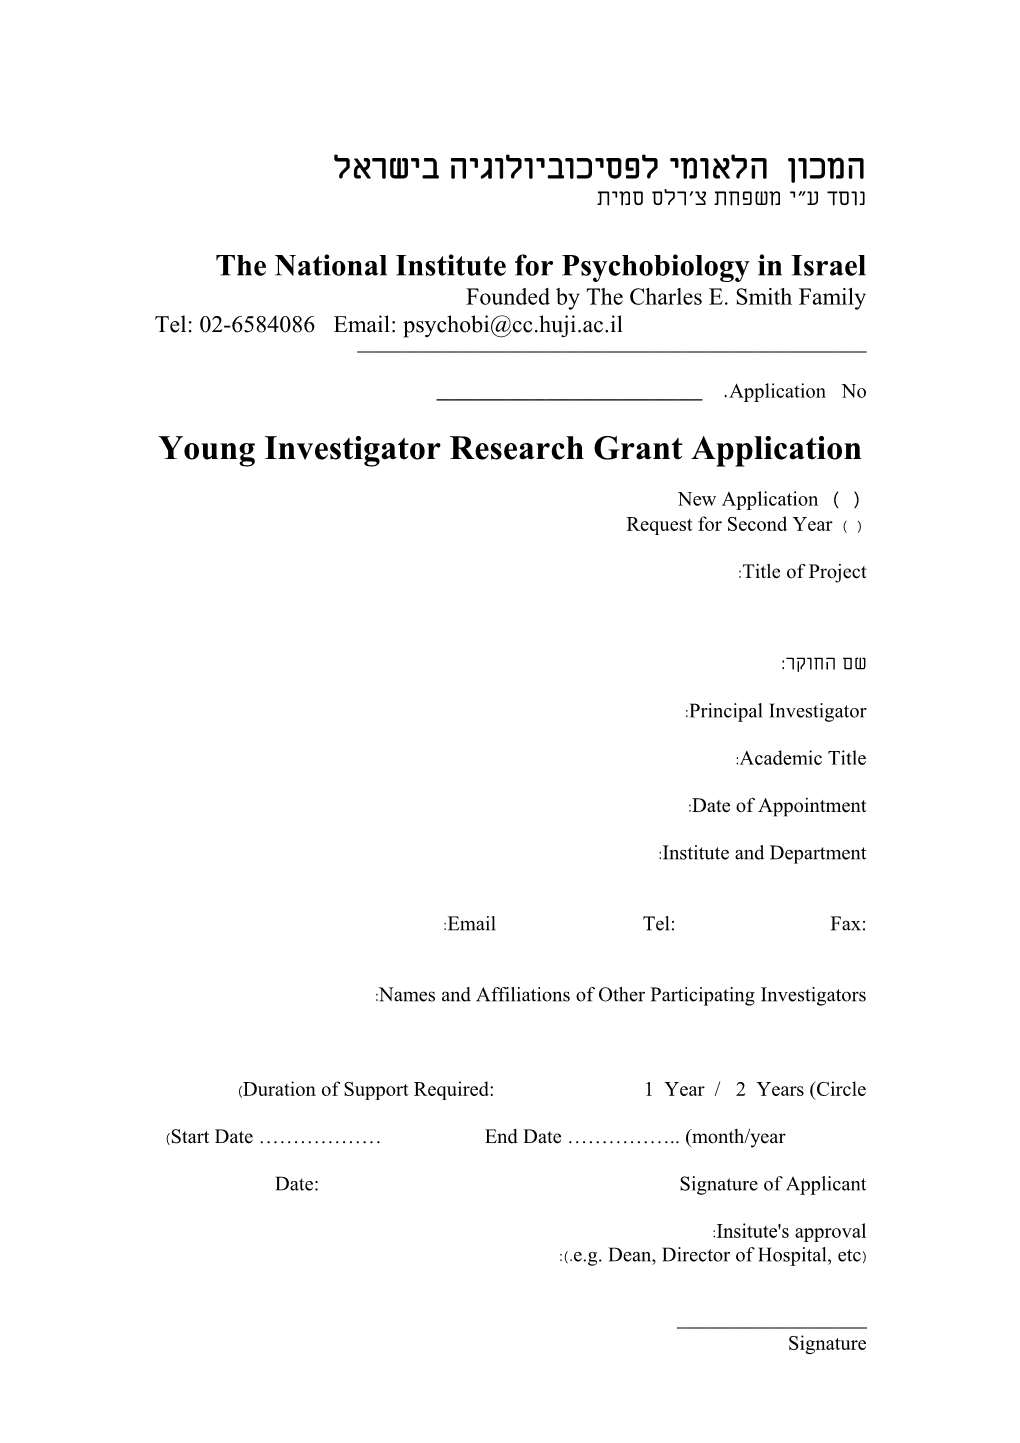 The National Institute for Psychobiology in Israel